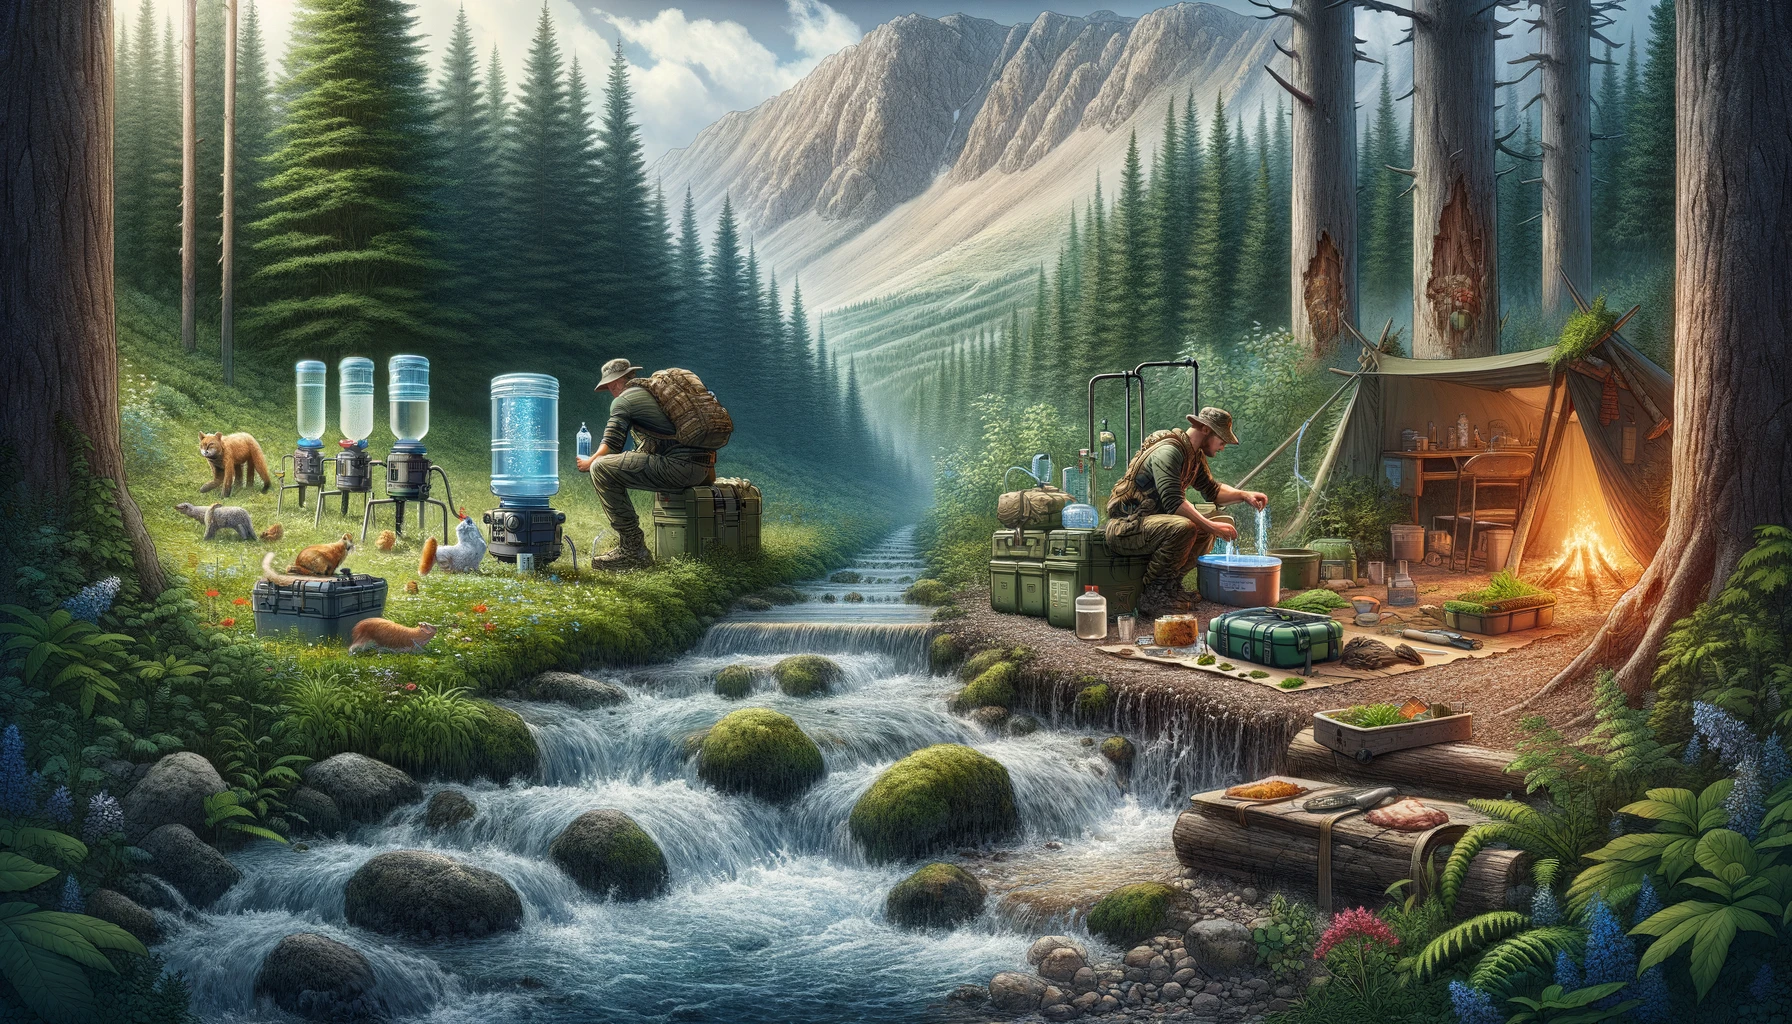 Instructional scene on water purification and food procurement in the wilderness, featuring an individual using a portable filtration system by a stream and another foraging and setting traps, set against a backdrop of dense forest and mountains, highlighting essential survival skills